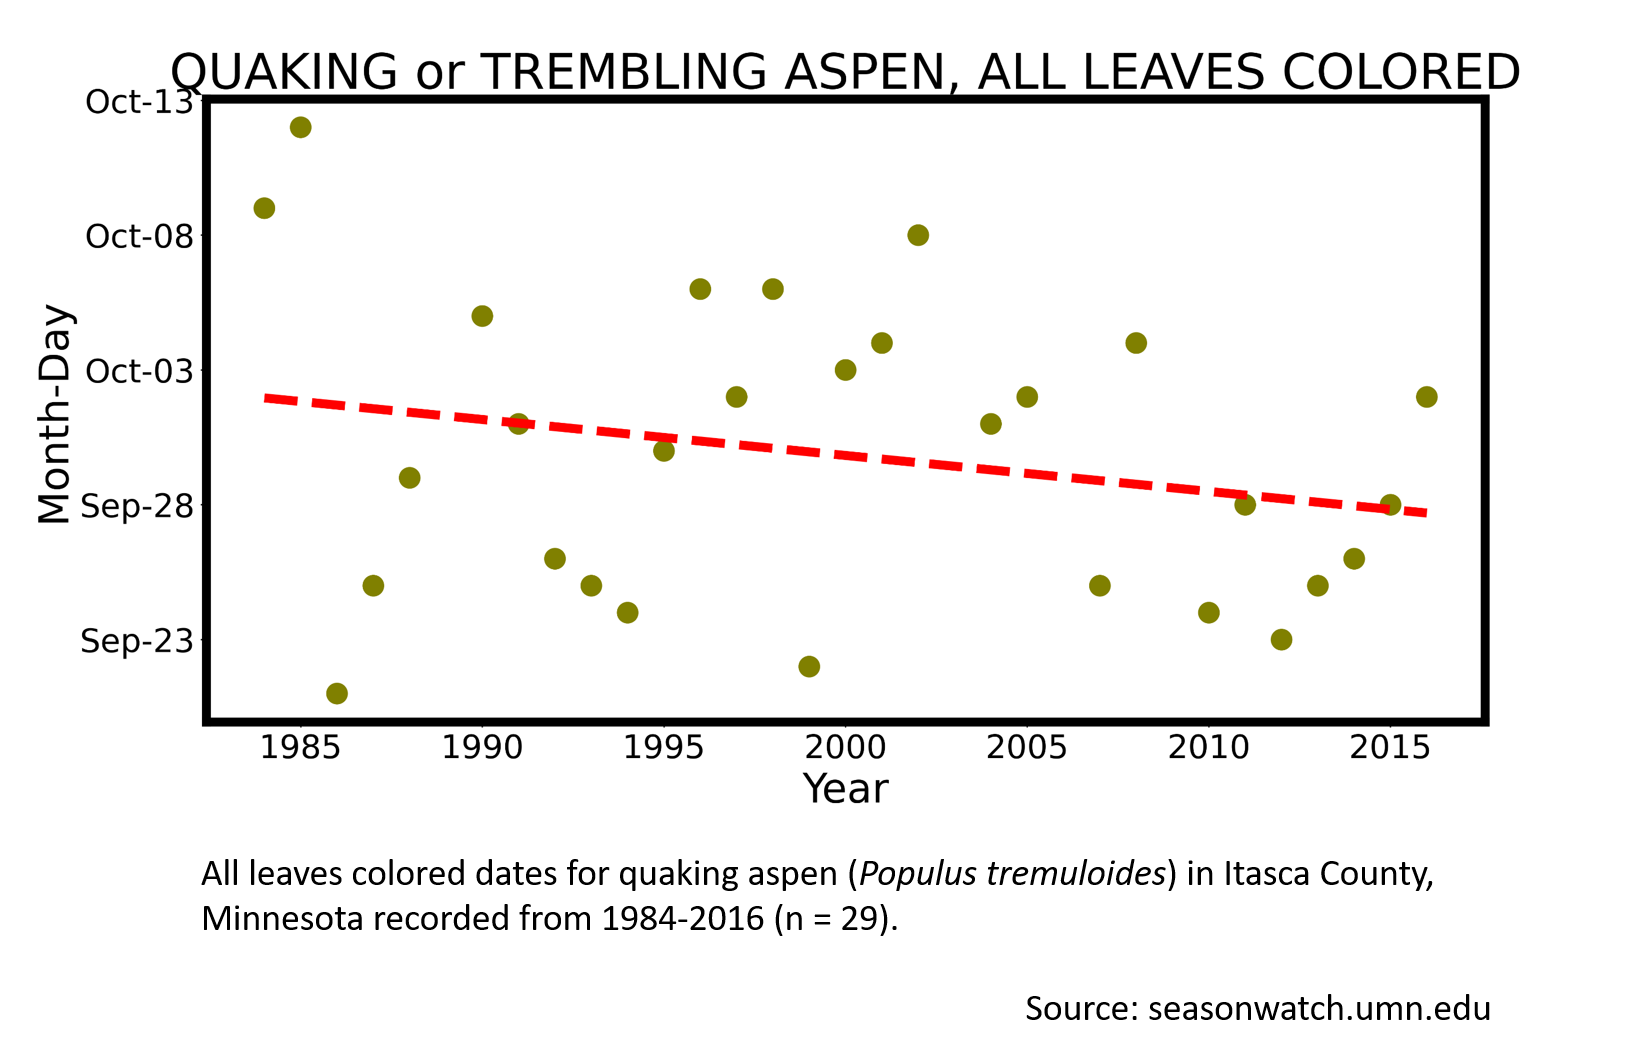 Scatterplot showing quaking aspen phenology observations in Itasca County, Minnesota